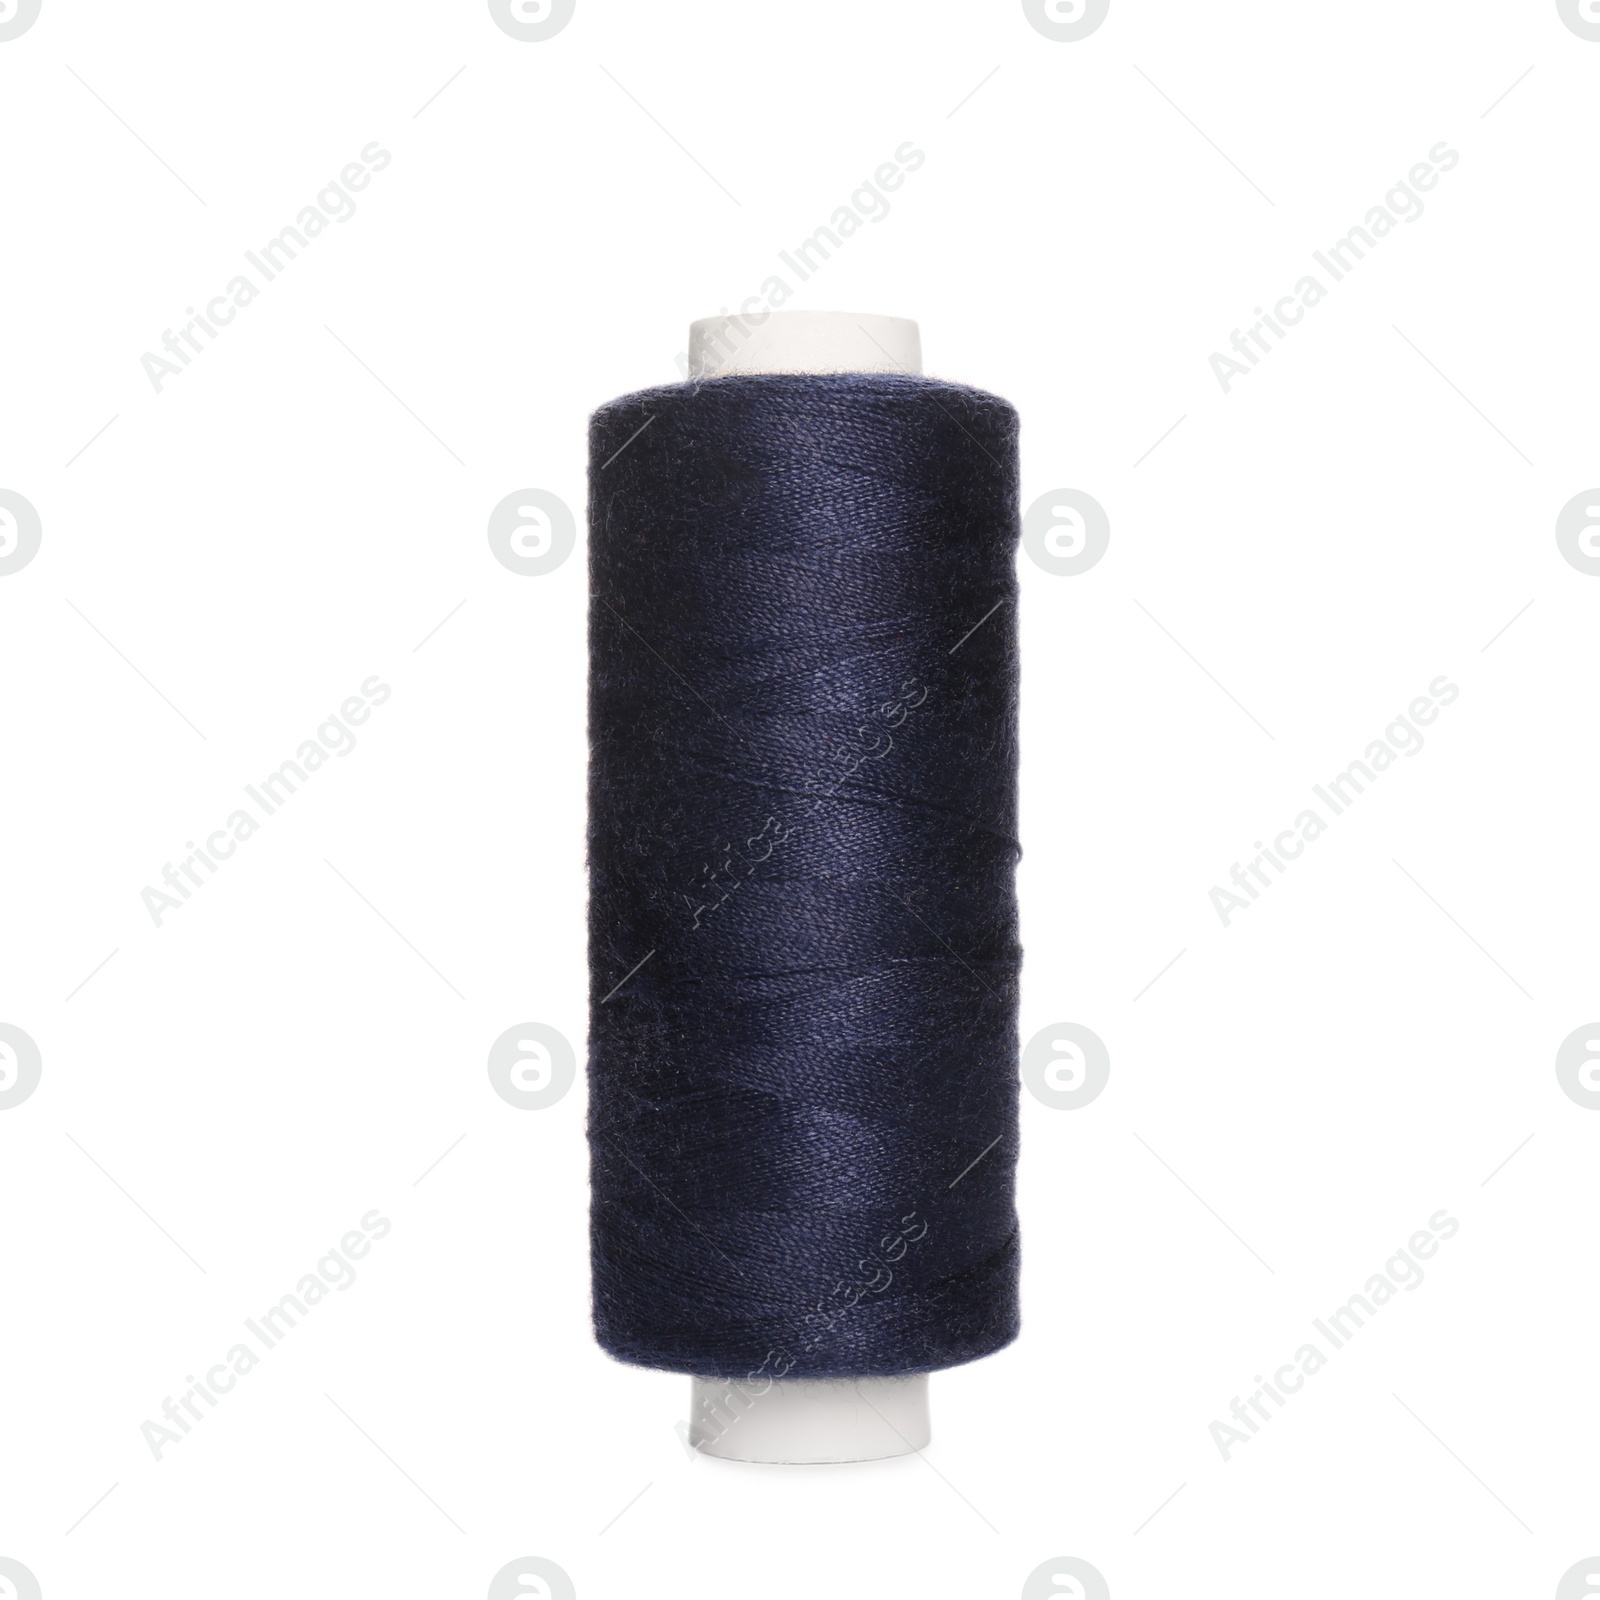 Photo of Spool of dark blue sewing thread isolated on white